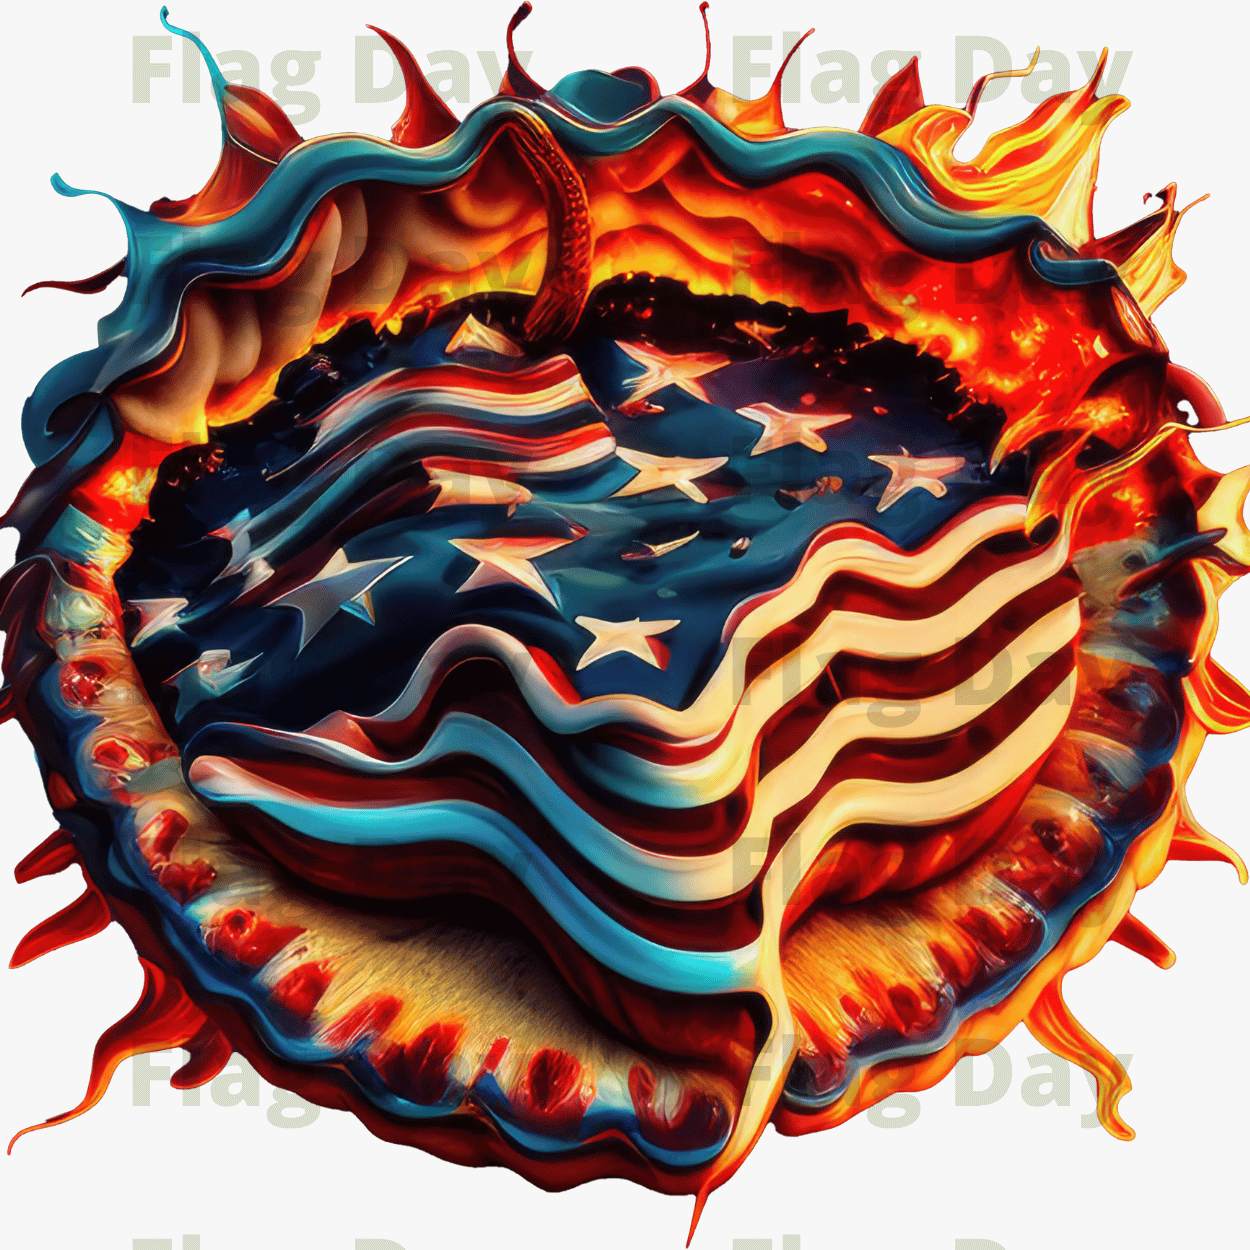 American Pie Fireworks Crust Psychedelic Trip through Time